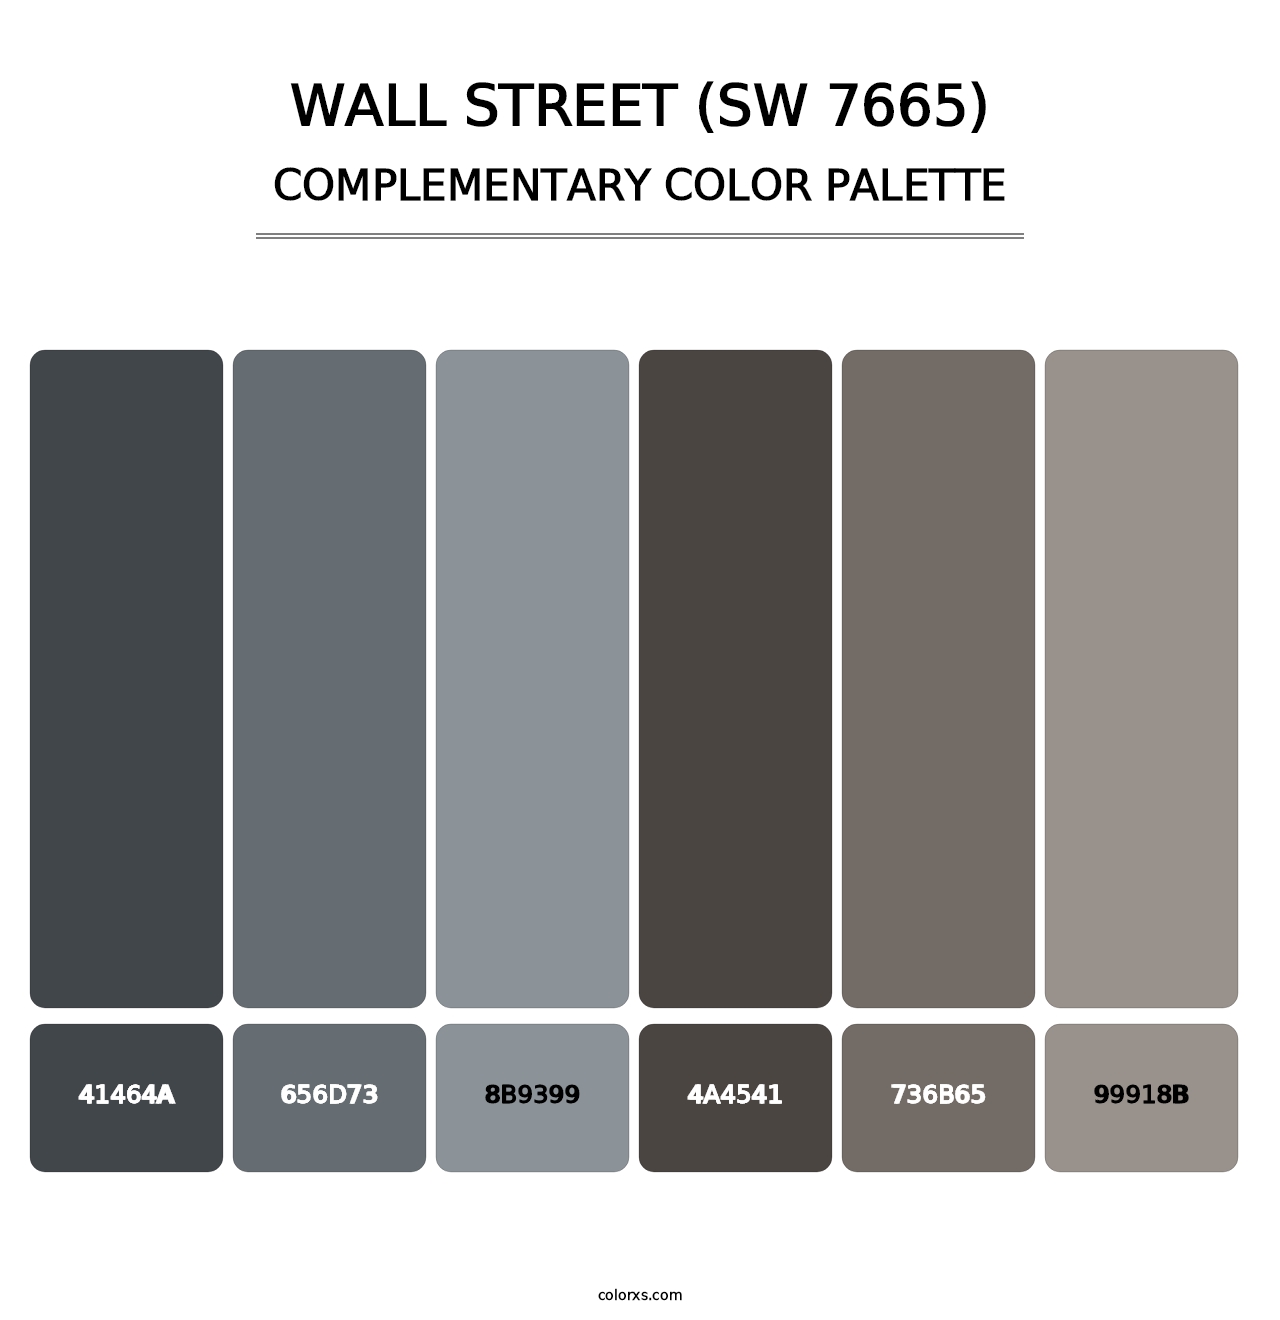 Wall Street (SW 7665) - Complementary Color Palette